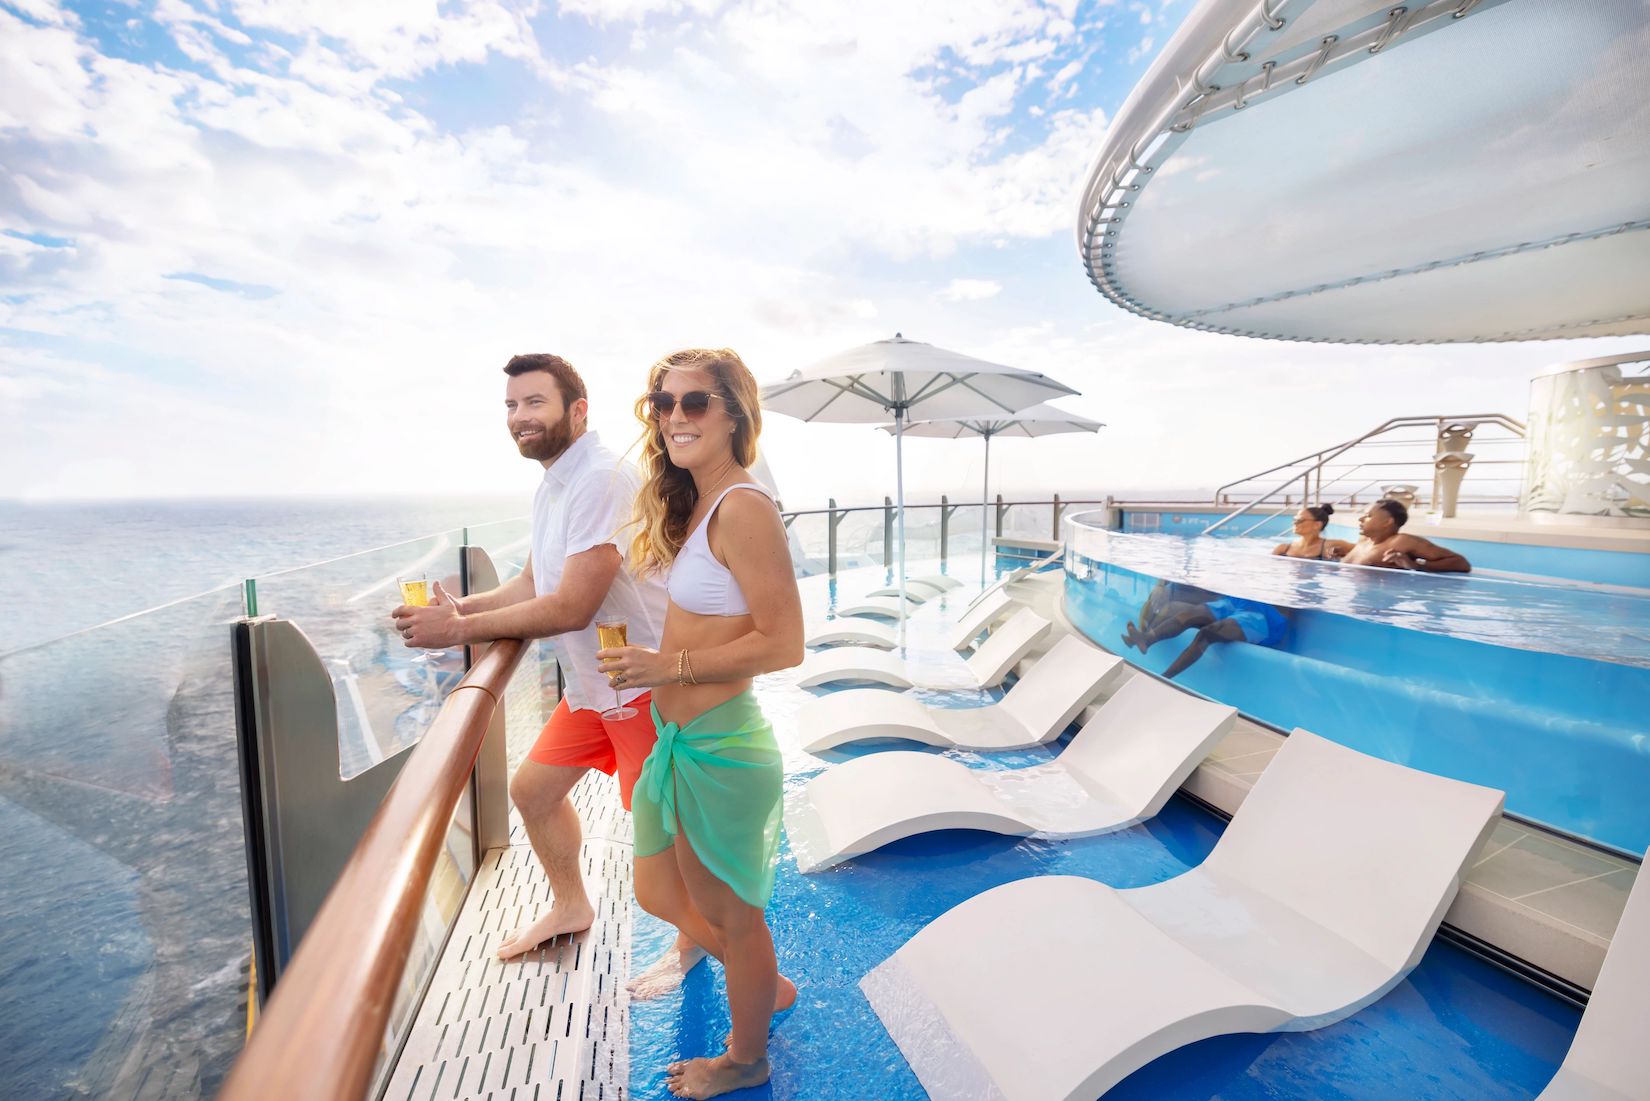 3 Safety Tips To Consider Before Boarding the Cruise Of Your Dreams  